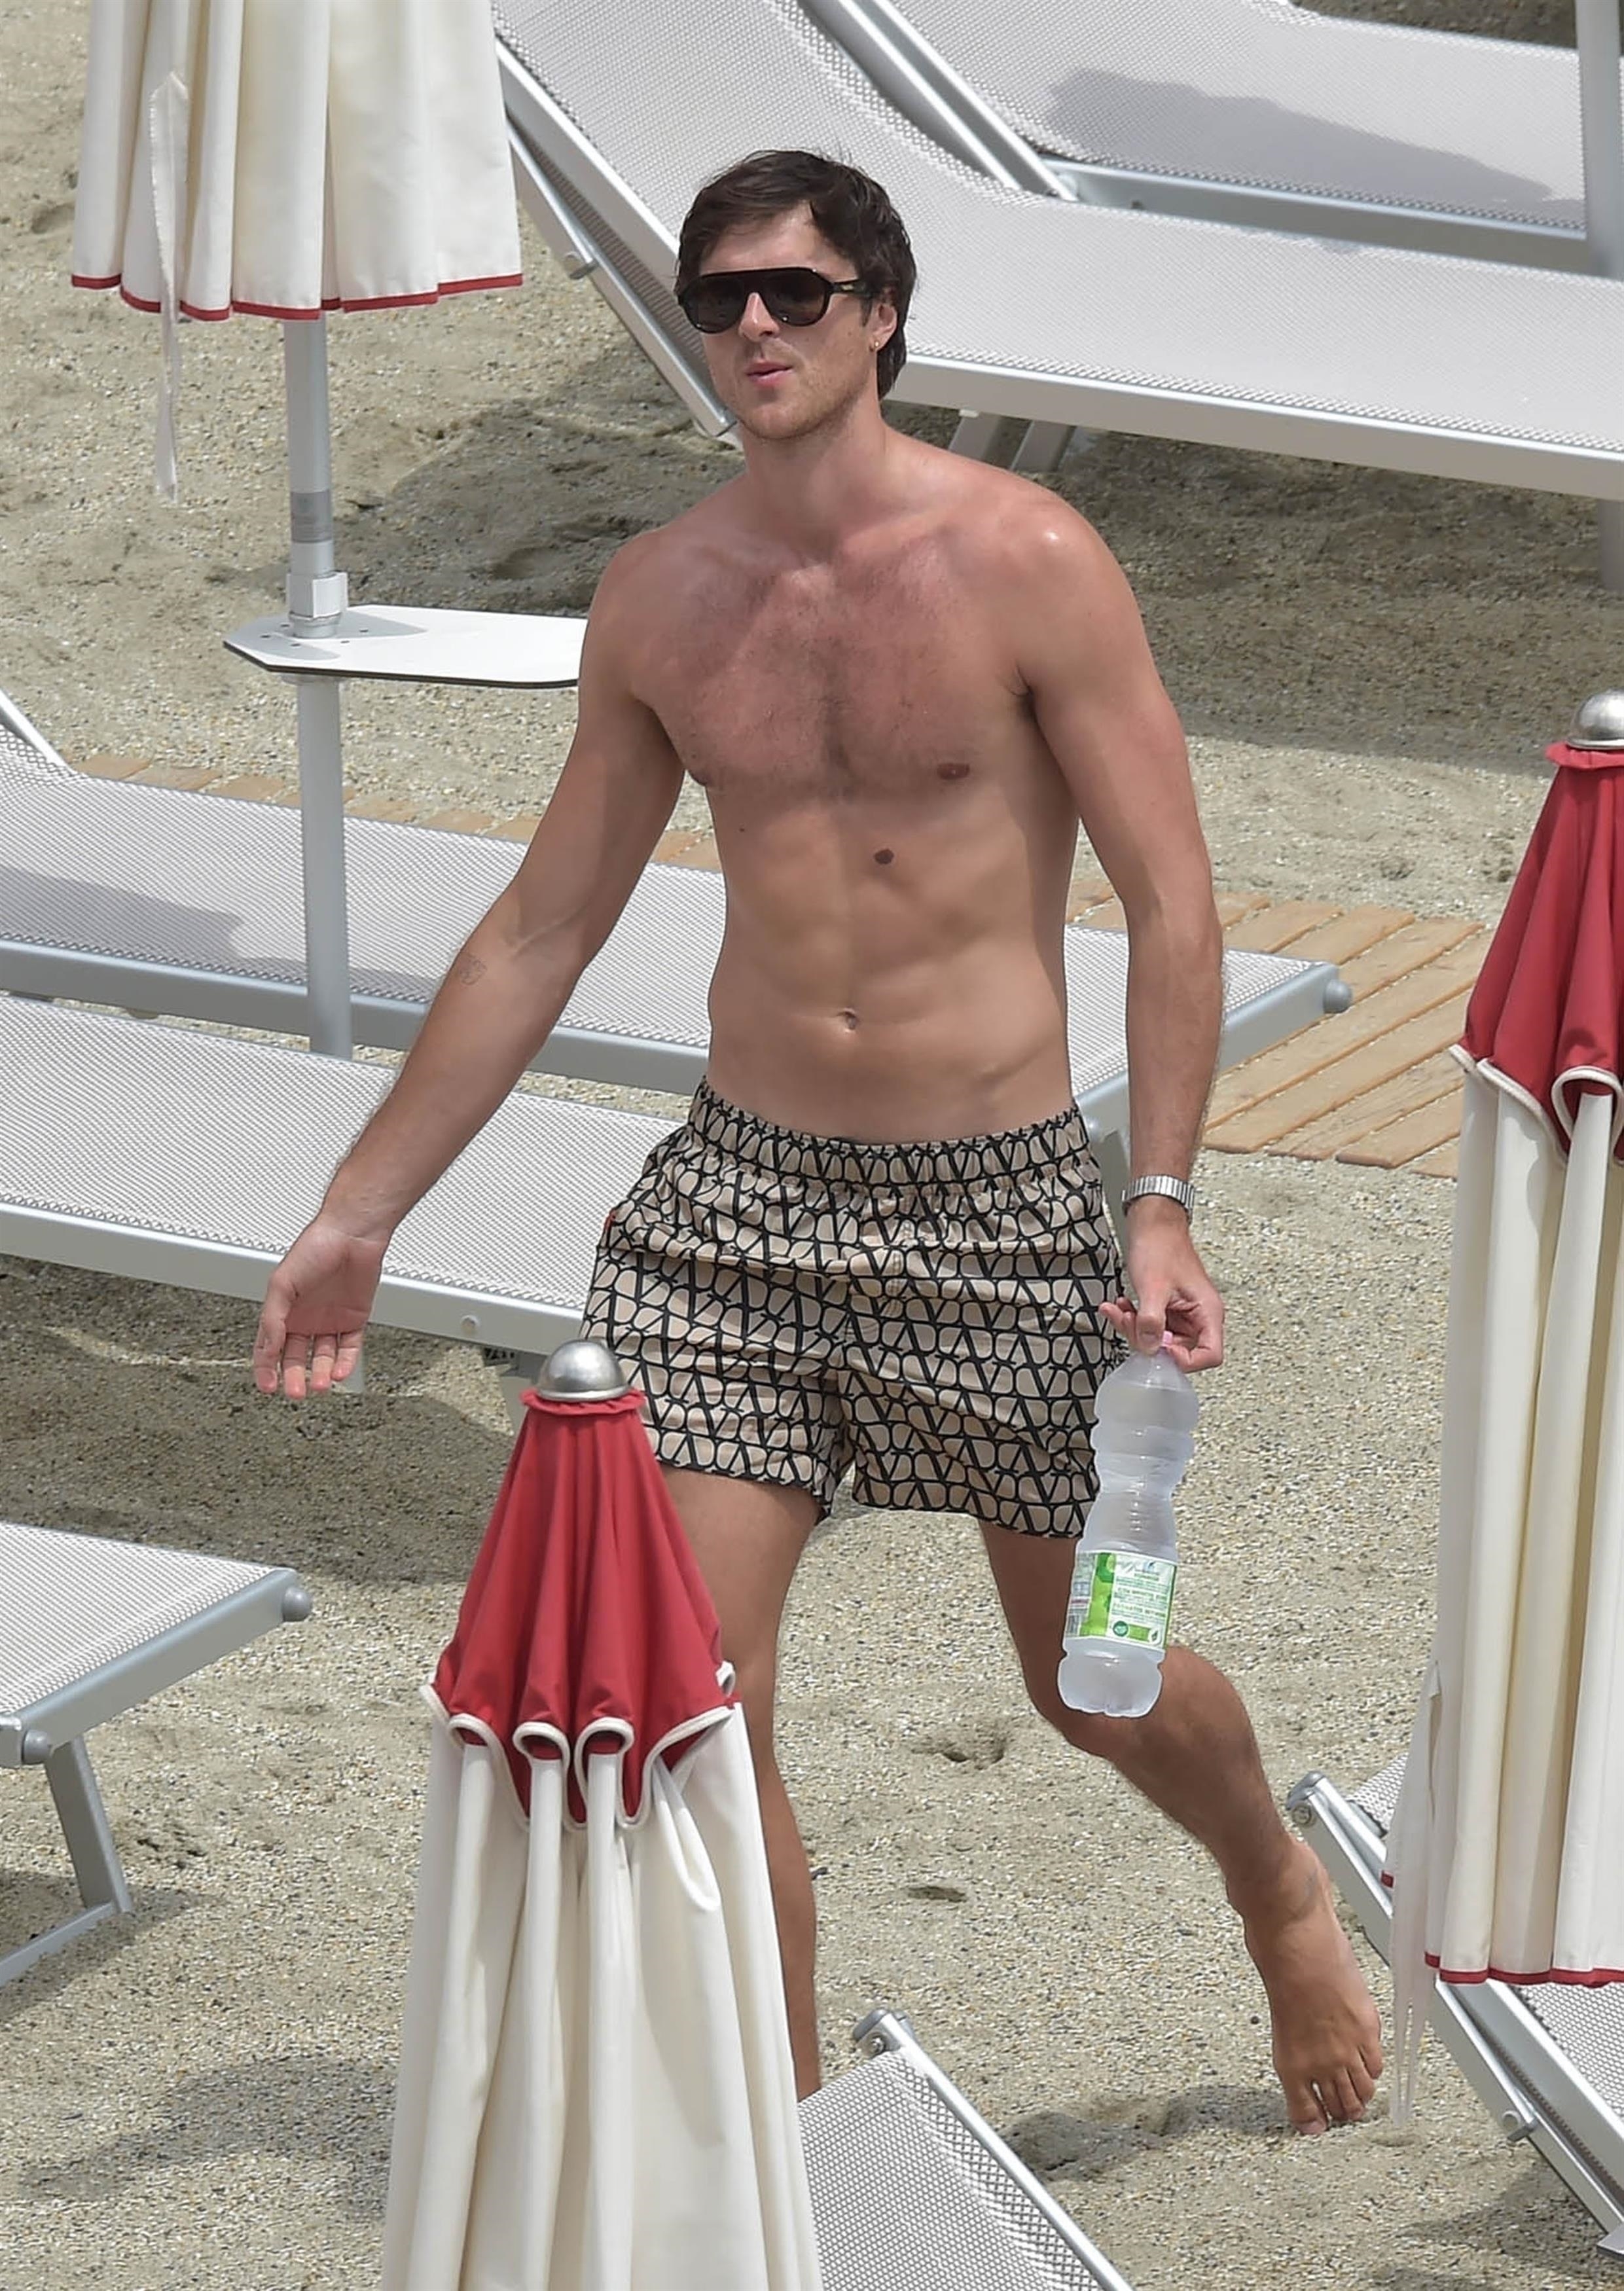 <p>Jacob Elordi hit the beach in Portofino, Italy, on June 15, while on vacation with his girlfriend, Olivia Jade. </p><p>MORE: <a href="https://www.msn.com/en-us/community/channel/vid-kwt2e0544658wubk9hsb0rpvnfkttmu3tuj7uq3i4wuywgbakeva?item=flights%3Aprg-tipsubsc-v1a&ocid=social-peregrine&cvid=333aa5de5a654aa7a98a6930005e8f60&ei=2" rel="noreferrer noopener">Follow Wonderwall on MSN for more fun celebrity & entertainment photo galleries and content</a></p>